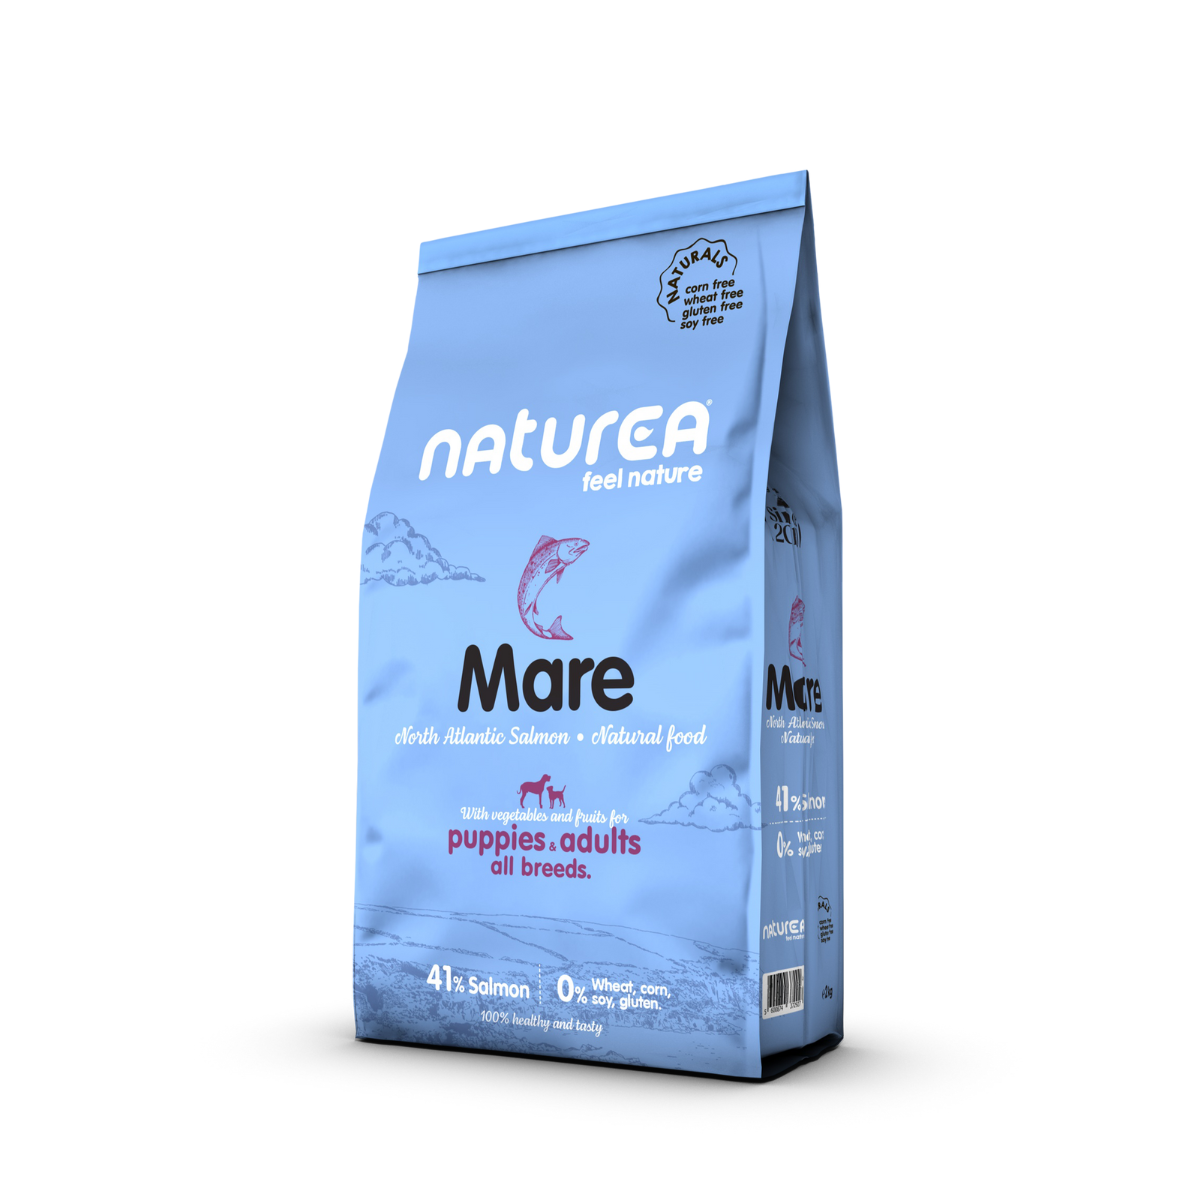 High-quality feed with salmon for adult dogs Naturea Naturals